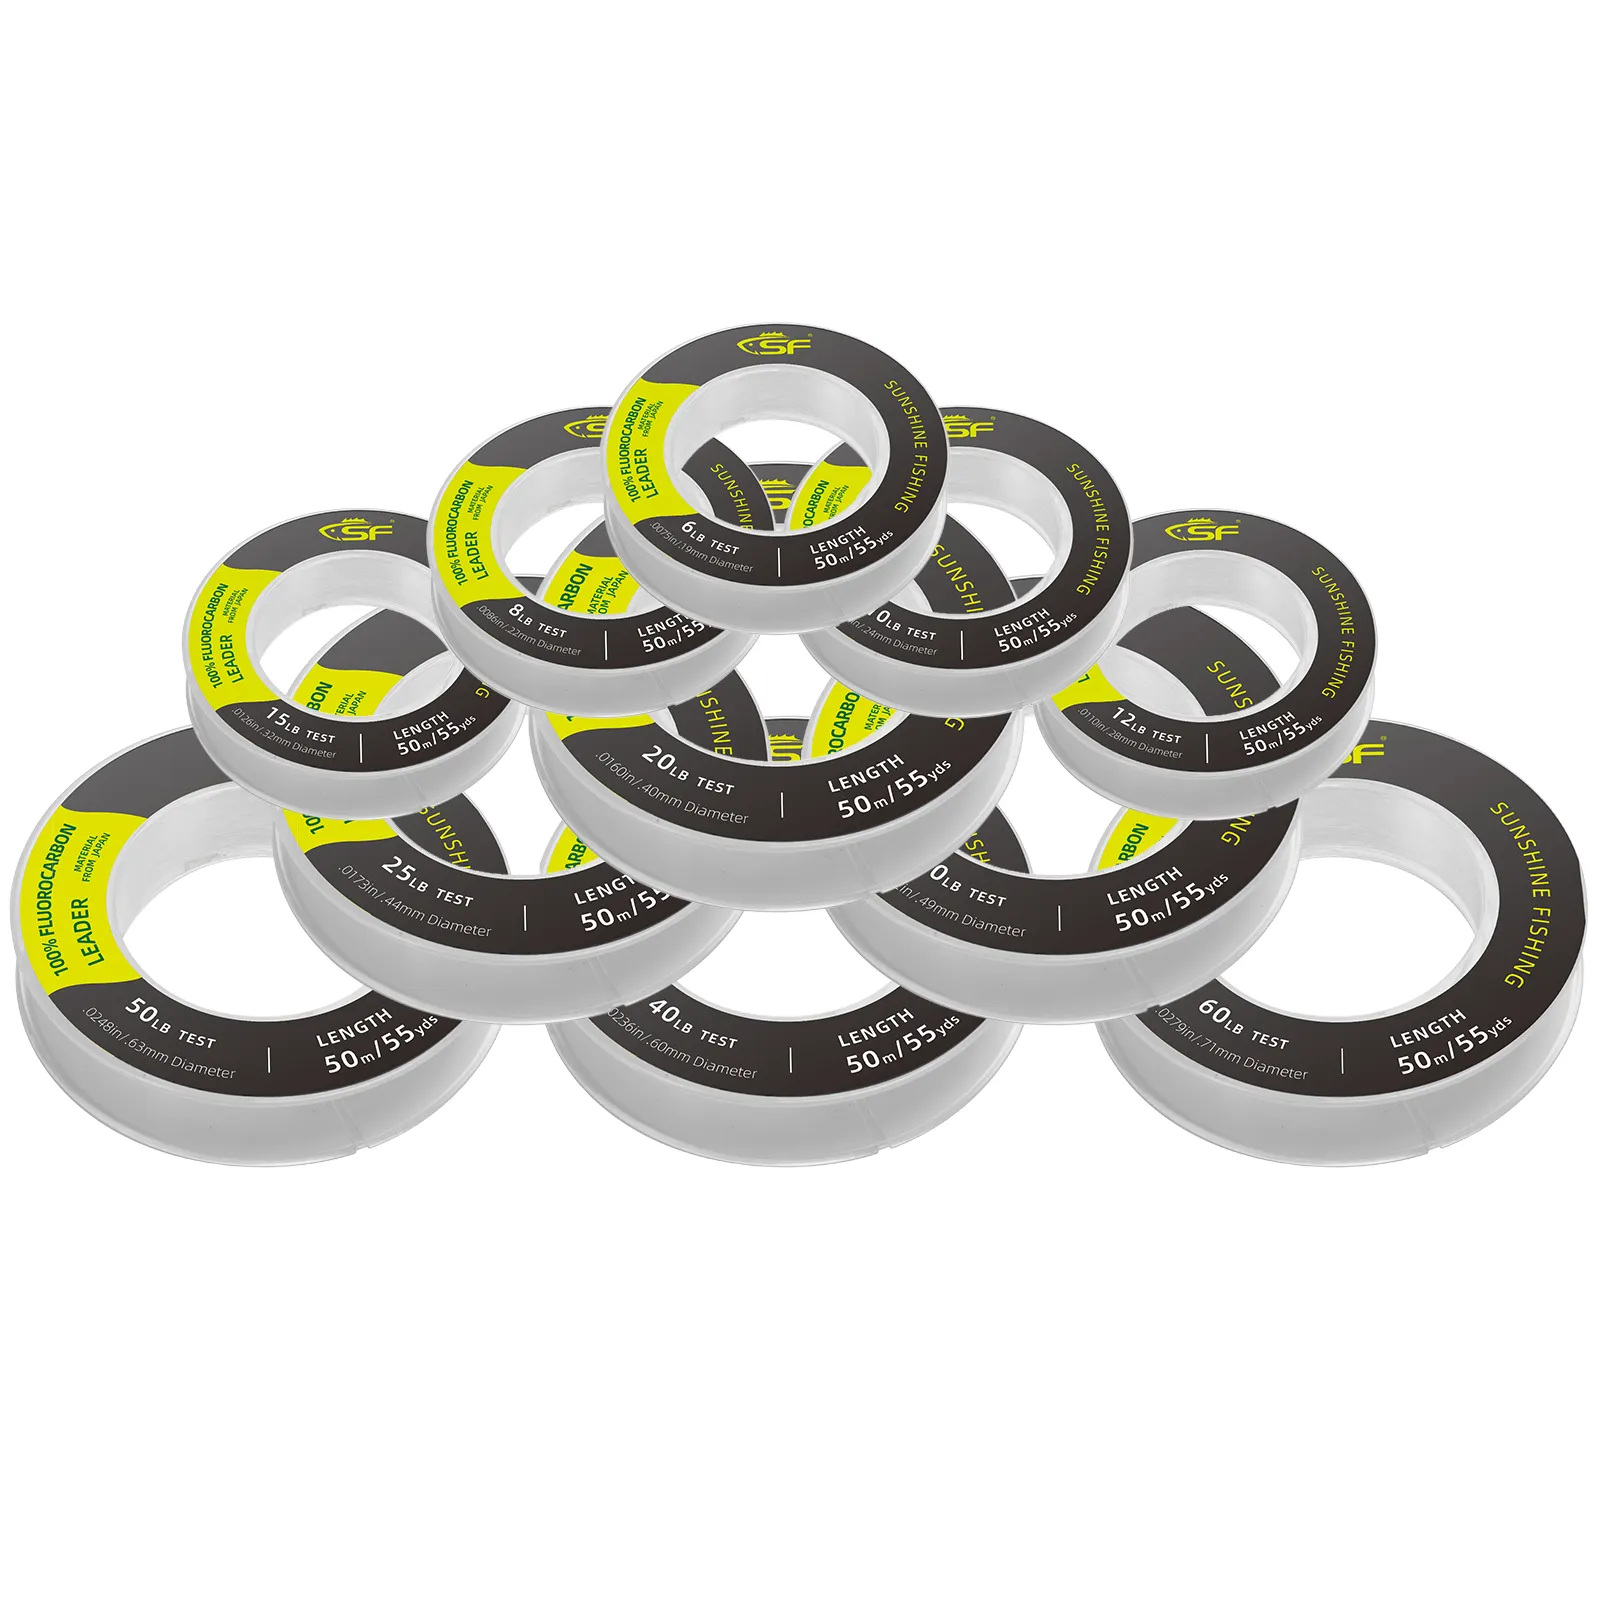 6LB-100LB 100% Pure Fluoro carbon Leader Fluoro carbon Line Super Strong für Angel geräte Fly Fishing Line Tippet Fast Sink